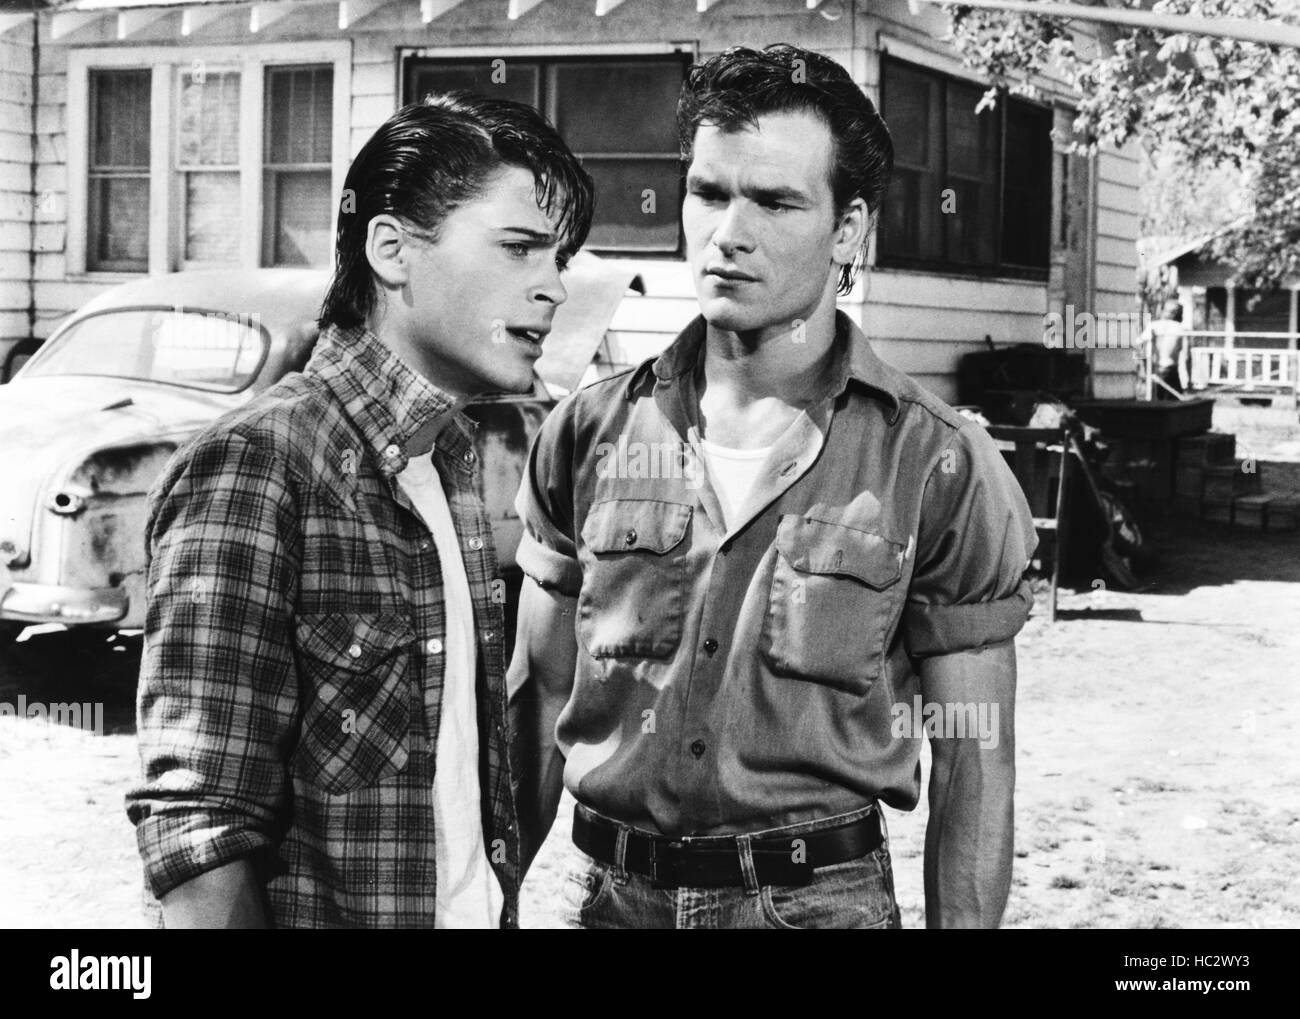 THE OUTSIDERS, from left, Rob Lowe, Patrick Swayze, 1983, ©Warner Bros ...